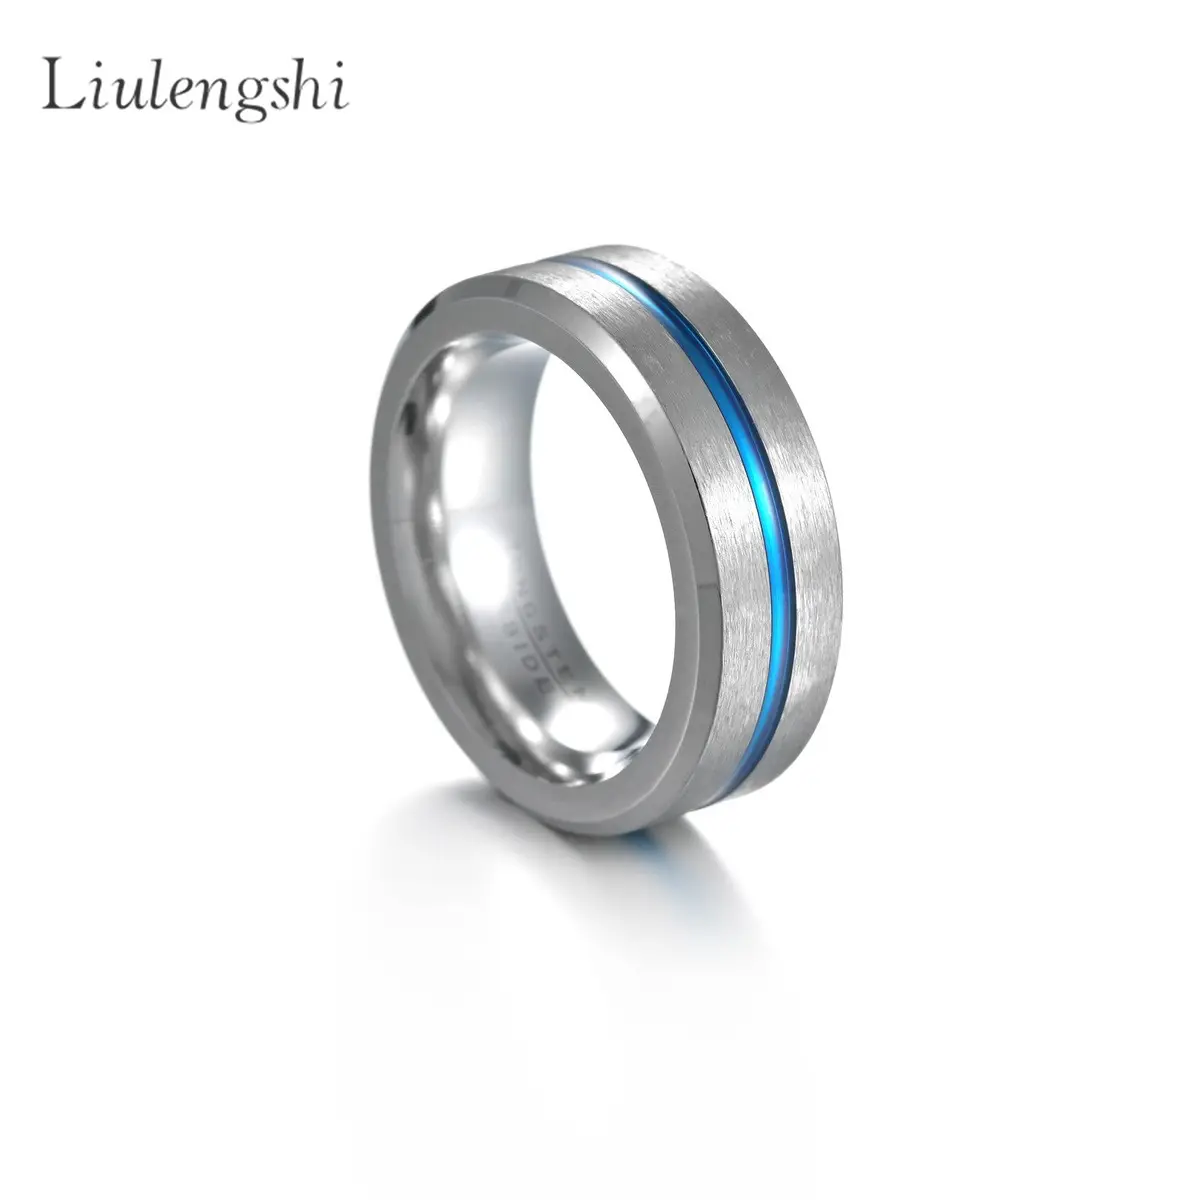 8mm Tungsten Carbide Ring for Men Women Comfort Fit Brushed Blue Silver Wedding Band Size 4-14